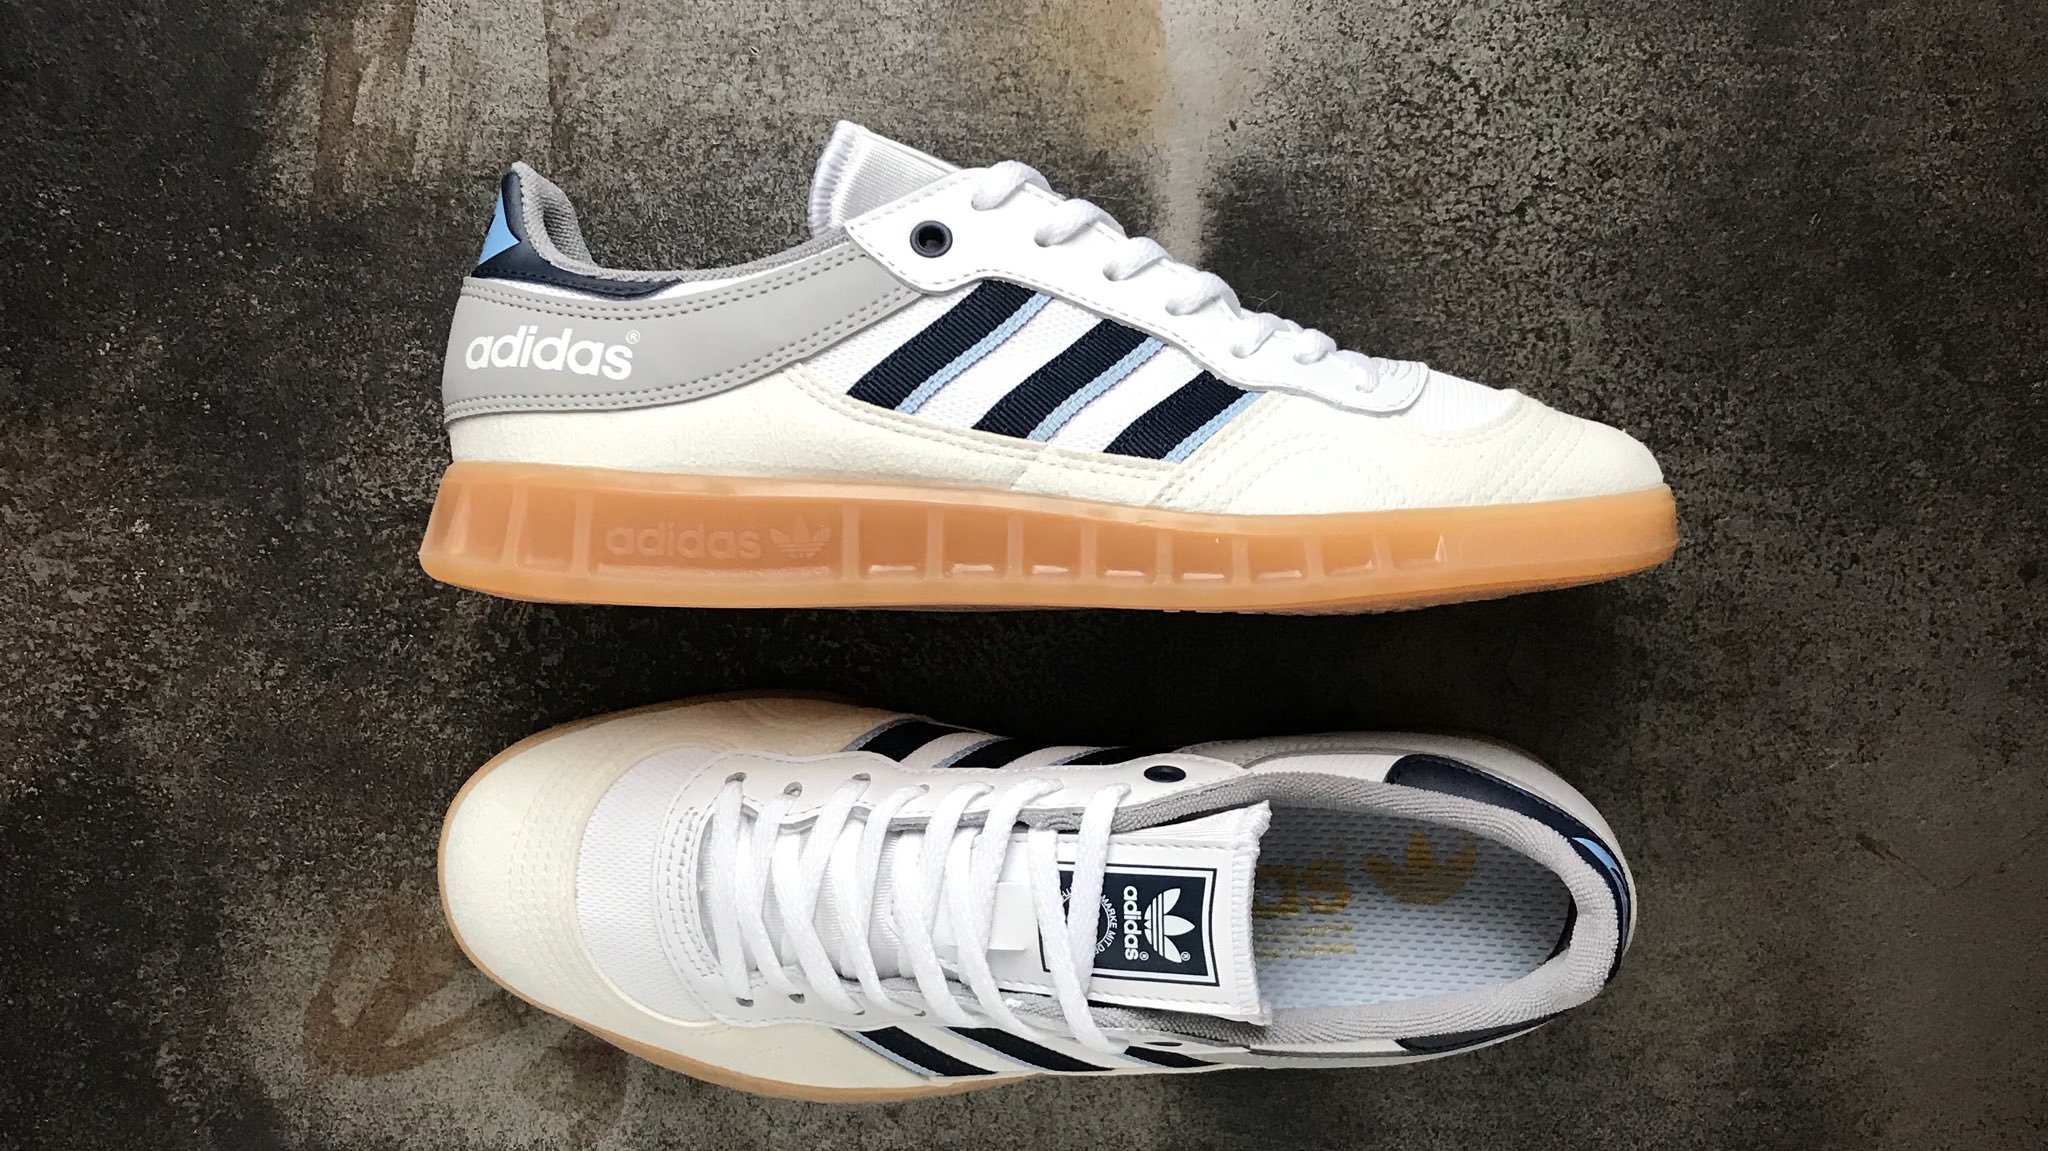 Contribuyente reunirse represa wellgosh on Twitter: "The Adidas Liga is a one-to-one reissue of the Adidas  Handball Top Mesh which first released in 1987 and originally went by the  name 'Liga'. Available now £84.95 https://t.co/bx76NNZuS2